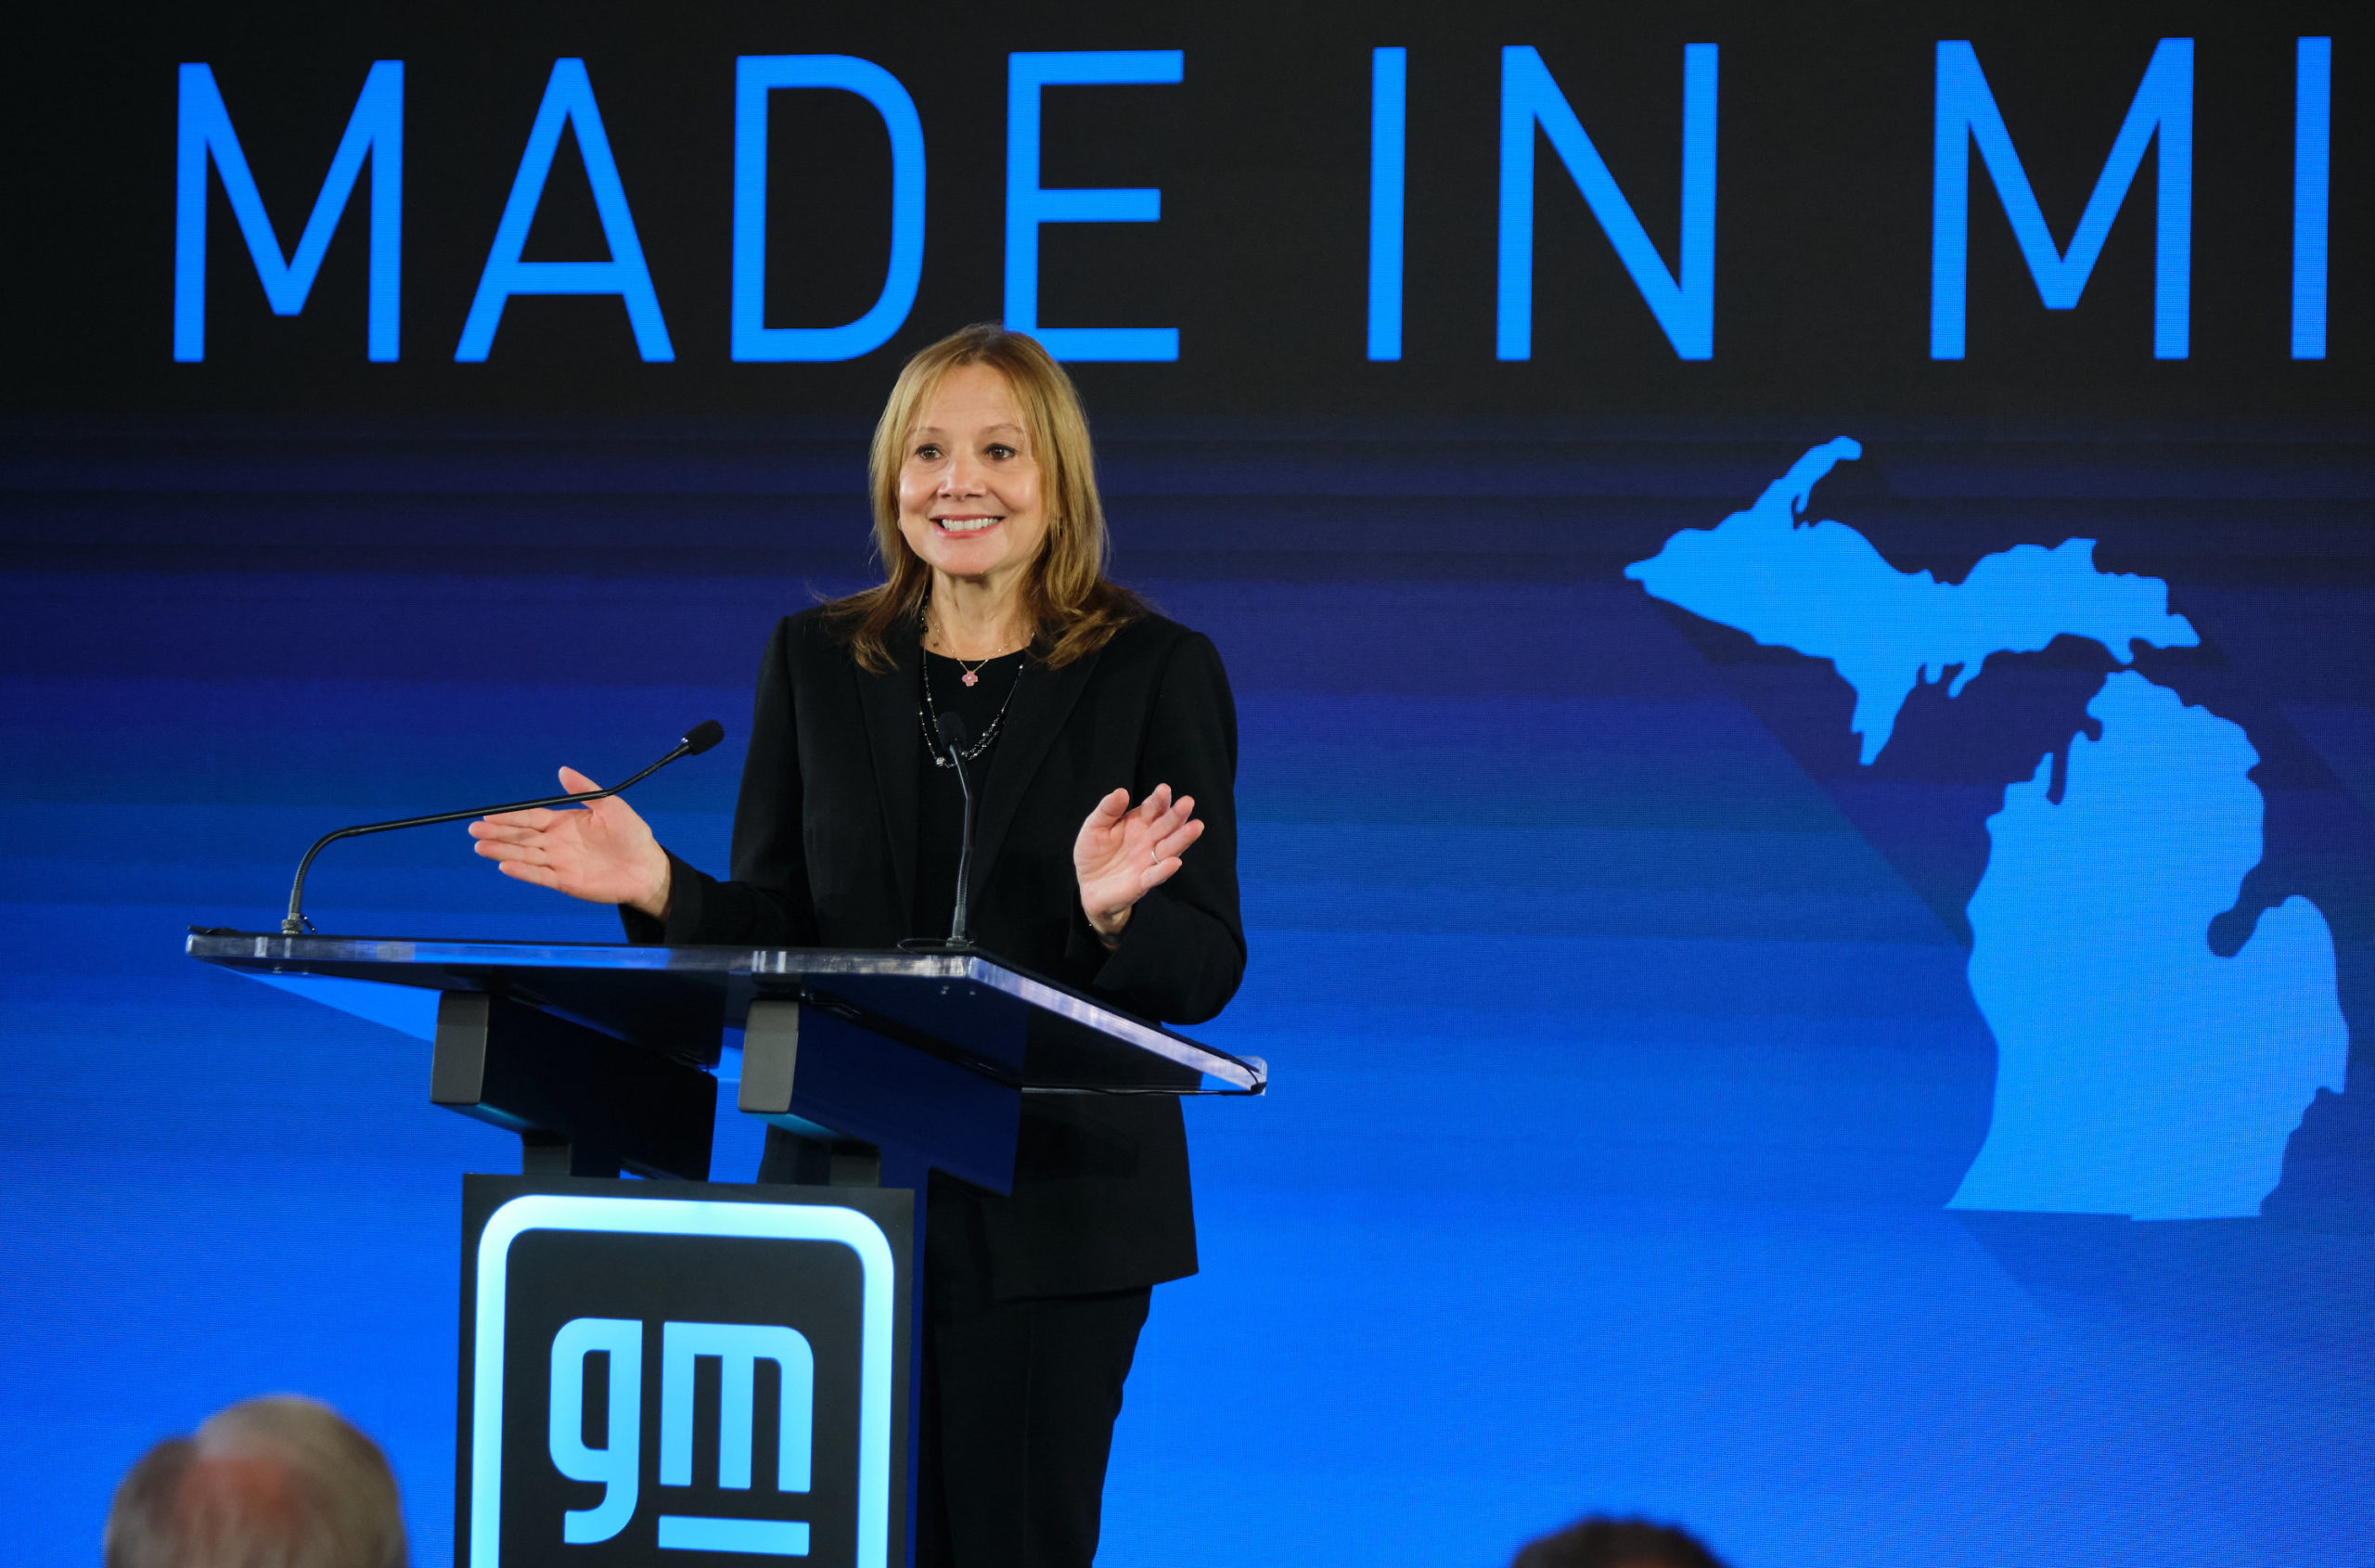 General Motors Chair and CEO Mary Barra announces Tuesday, January 25, 2022 a GM investment of more than $7 billion in four Michigan manufacturing sites that includes building a new Ultium Cells battery cell plant in Lansing and converting the GM Orion Assembly plant to build full-size electric pickups. The investment will create 4,000 new jobs and retain 1,000. Barra made the announcement from the Senate Hearing Room of the Boji Tower in Lansing, Michigan. (Photo by Steve Fecht for General Motors)